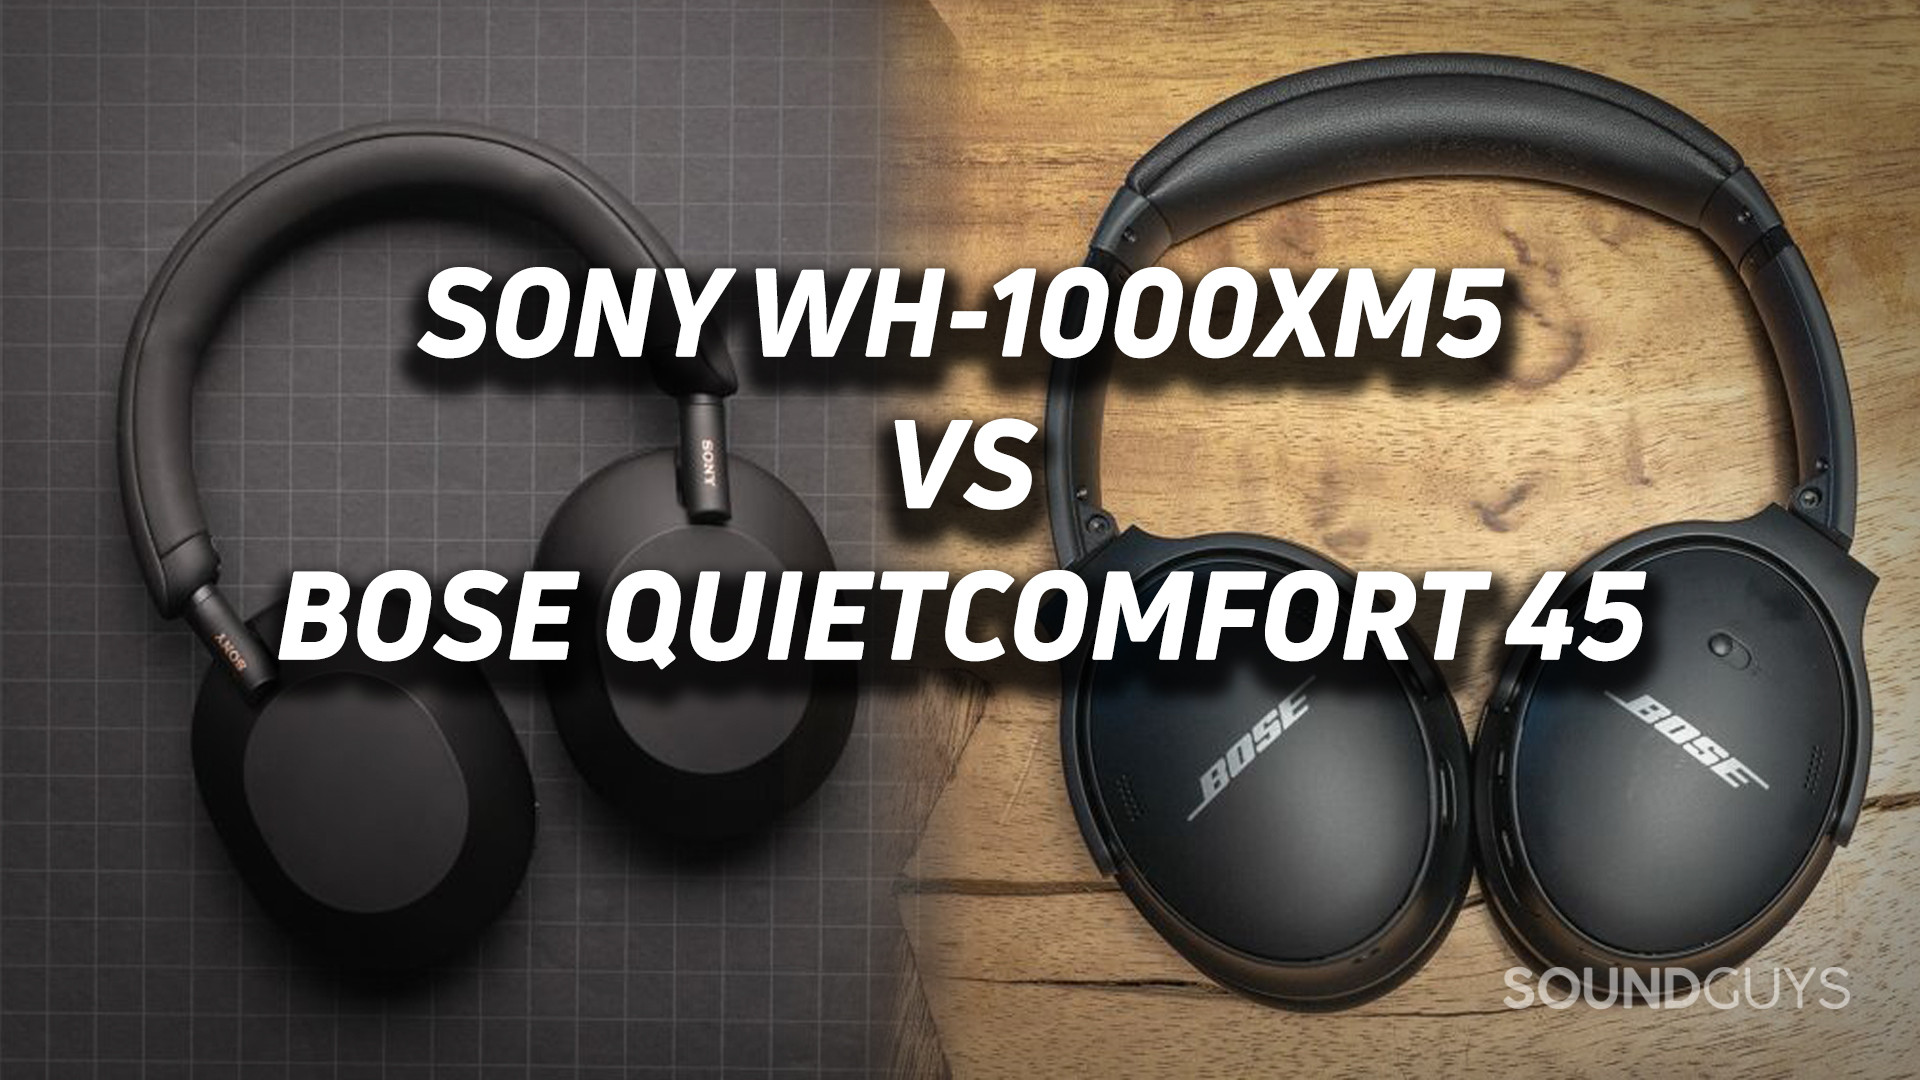 Image shows two photos overlaid one of the Sony WH-1000XM5 and the other of the Bose QuietComfort 45.